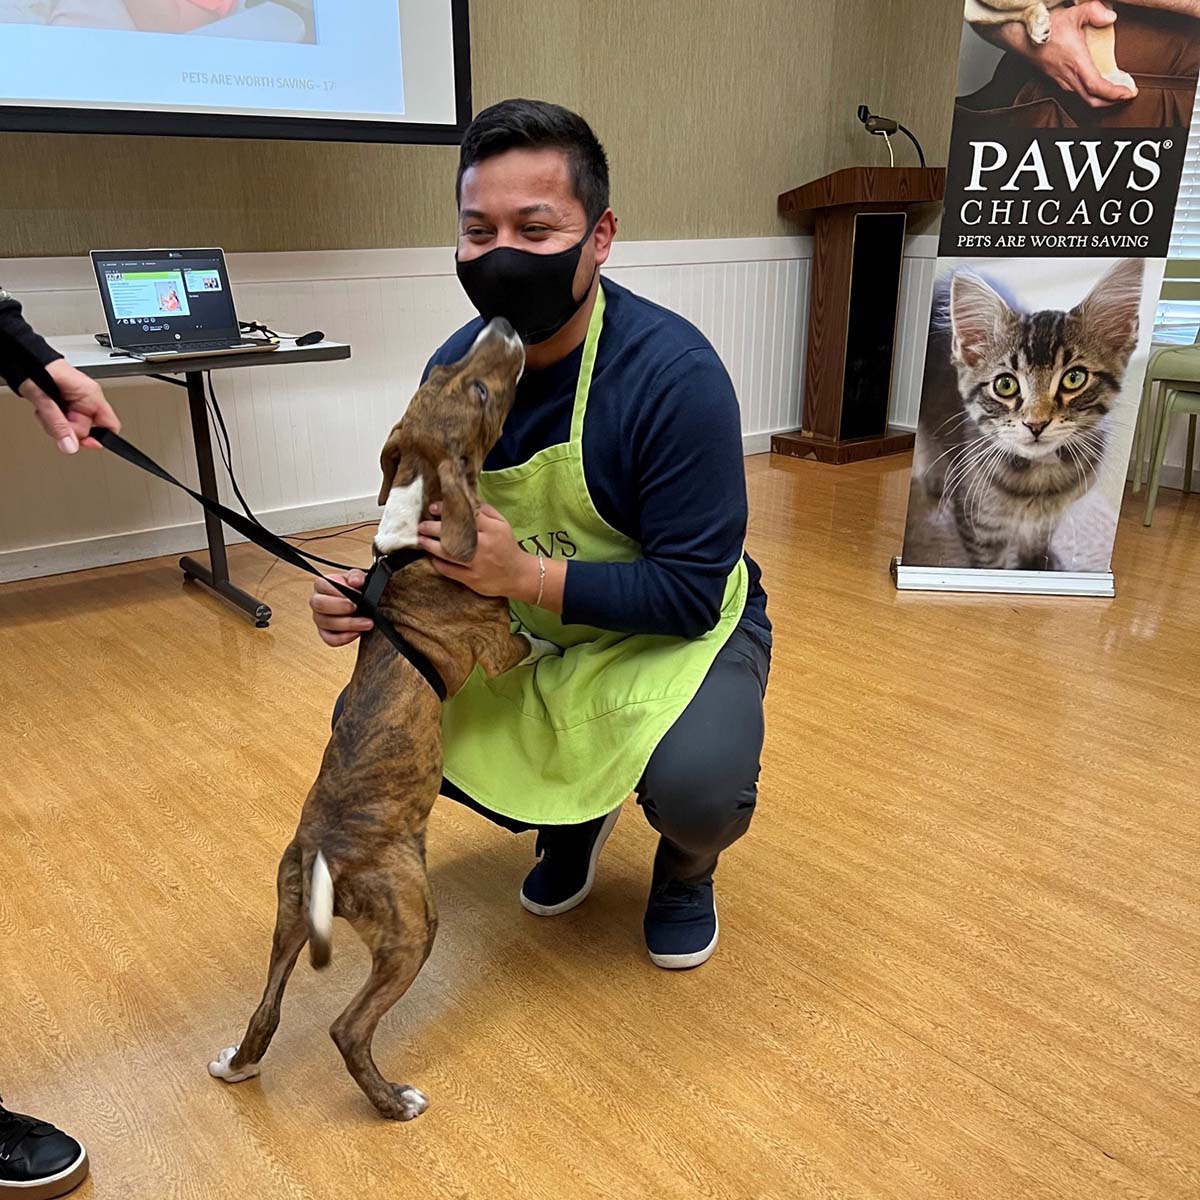 Tony Morales, wearing a light green PAWS apron and a black mask, squats on the floor with a puppy who is trying to lick his face